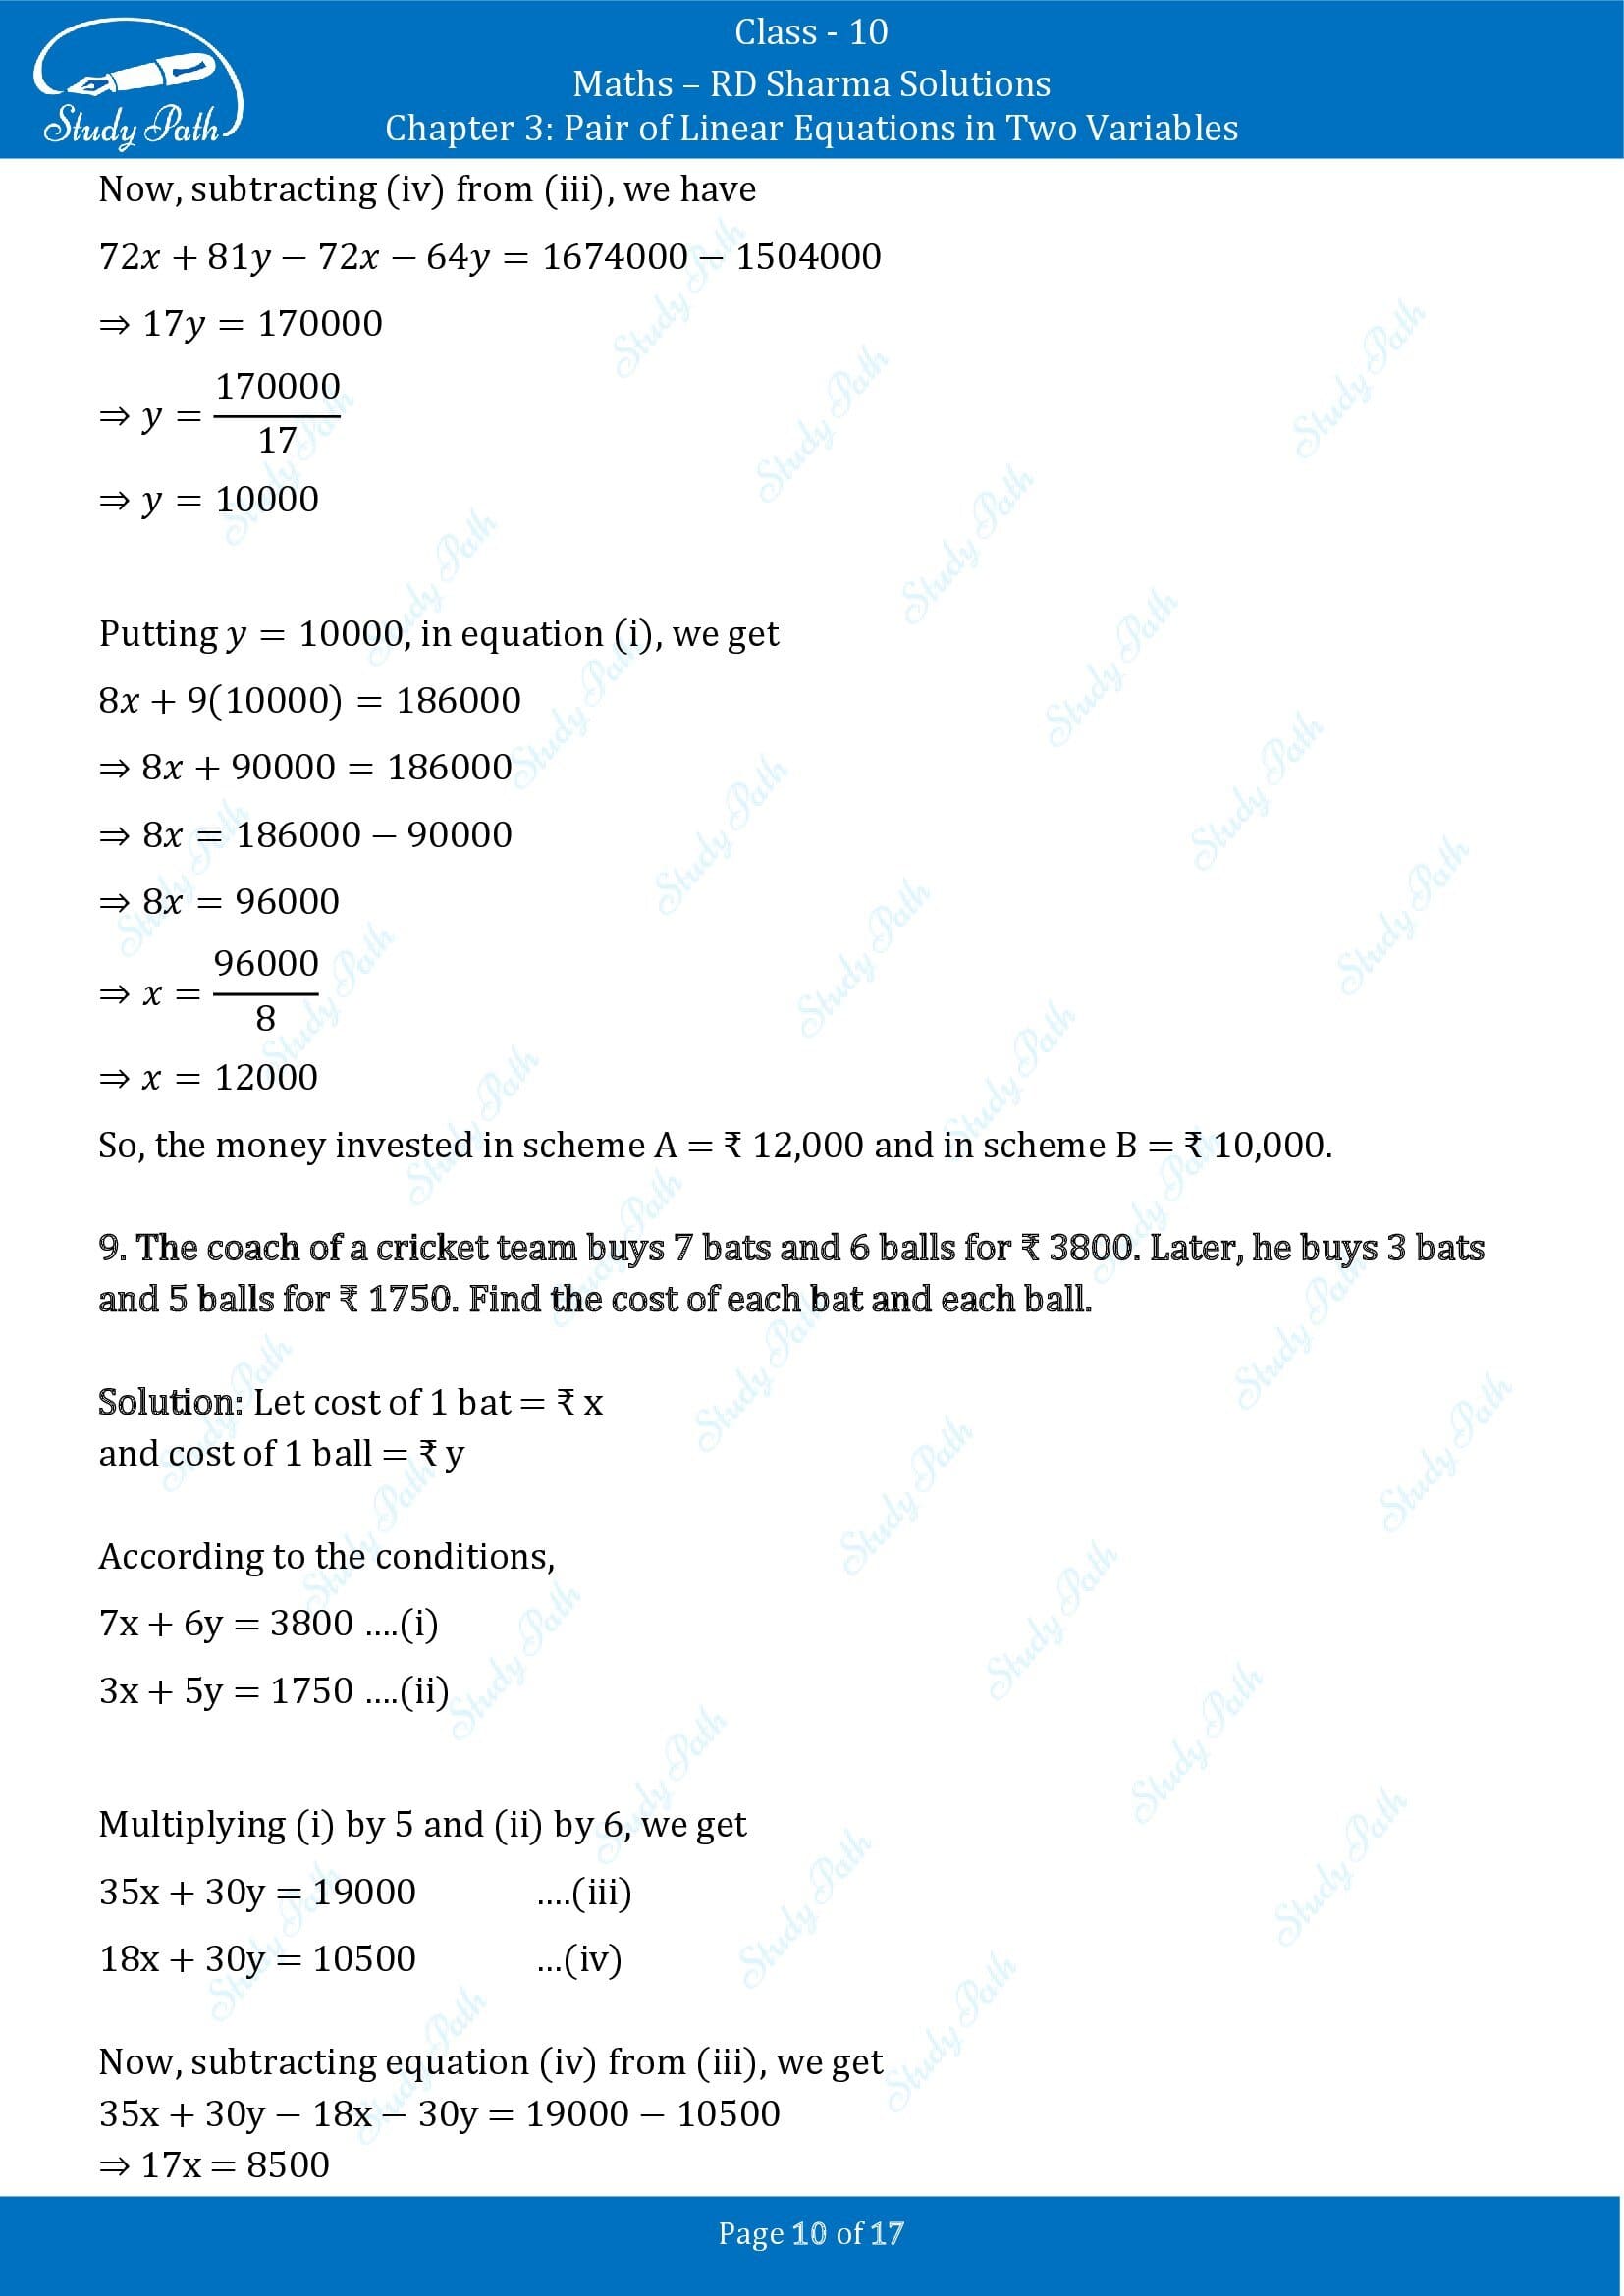 RD Sharma Solutions Class 10 Chapter 3 Pair of Linear Equations in Two Variables Exercise 3.6 00010